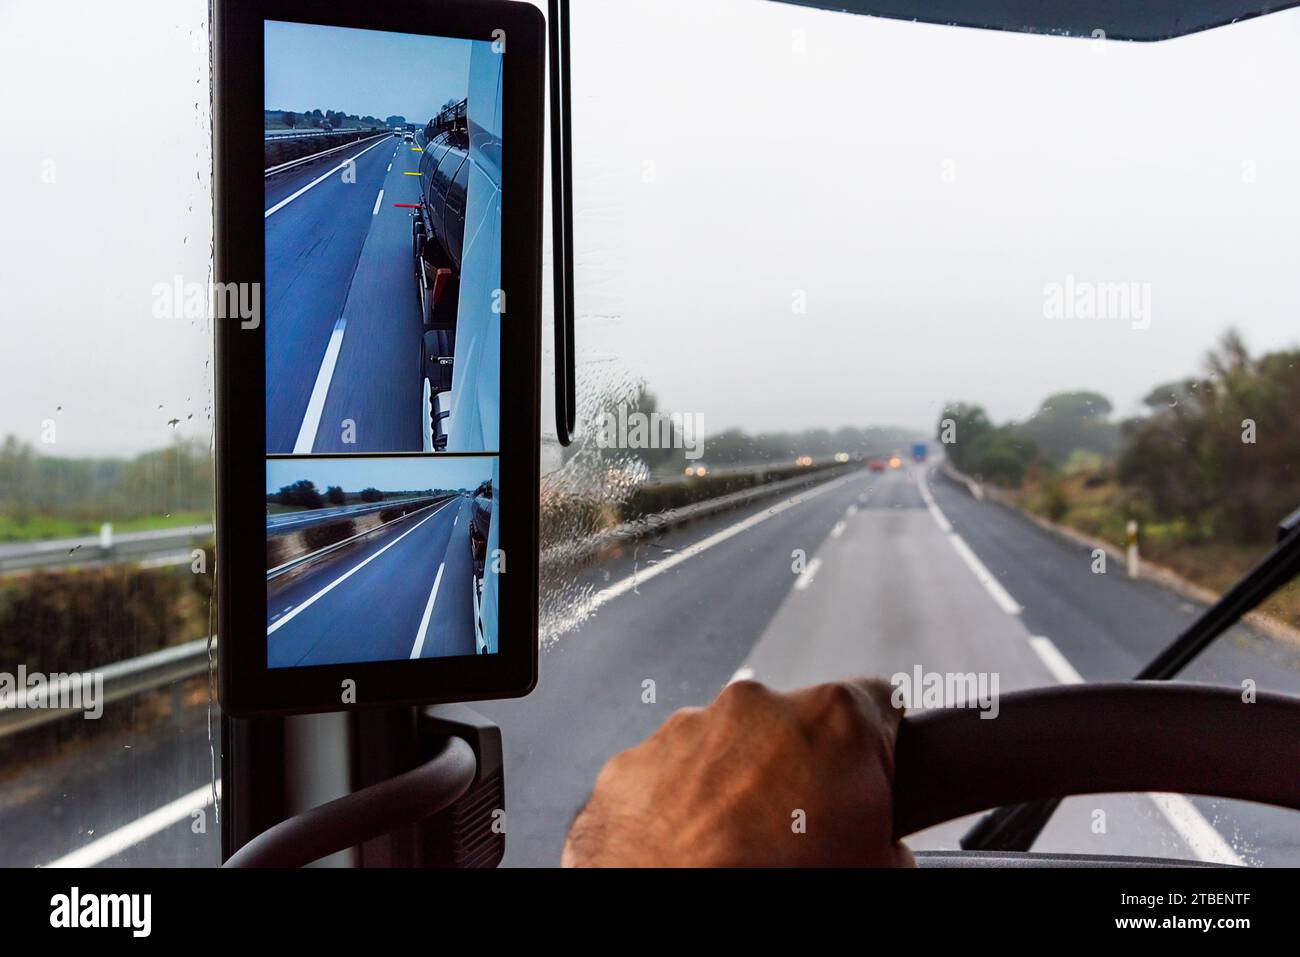 Rearview mirror with cameras in a truck, screen inside the vehicle where the driver can see the back of the trailer. Stock Photo